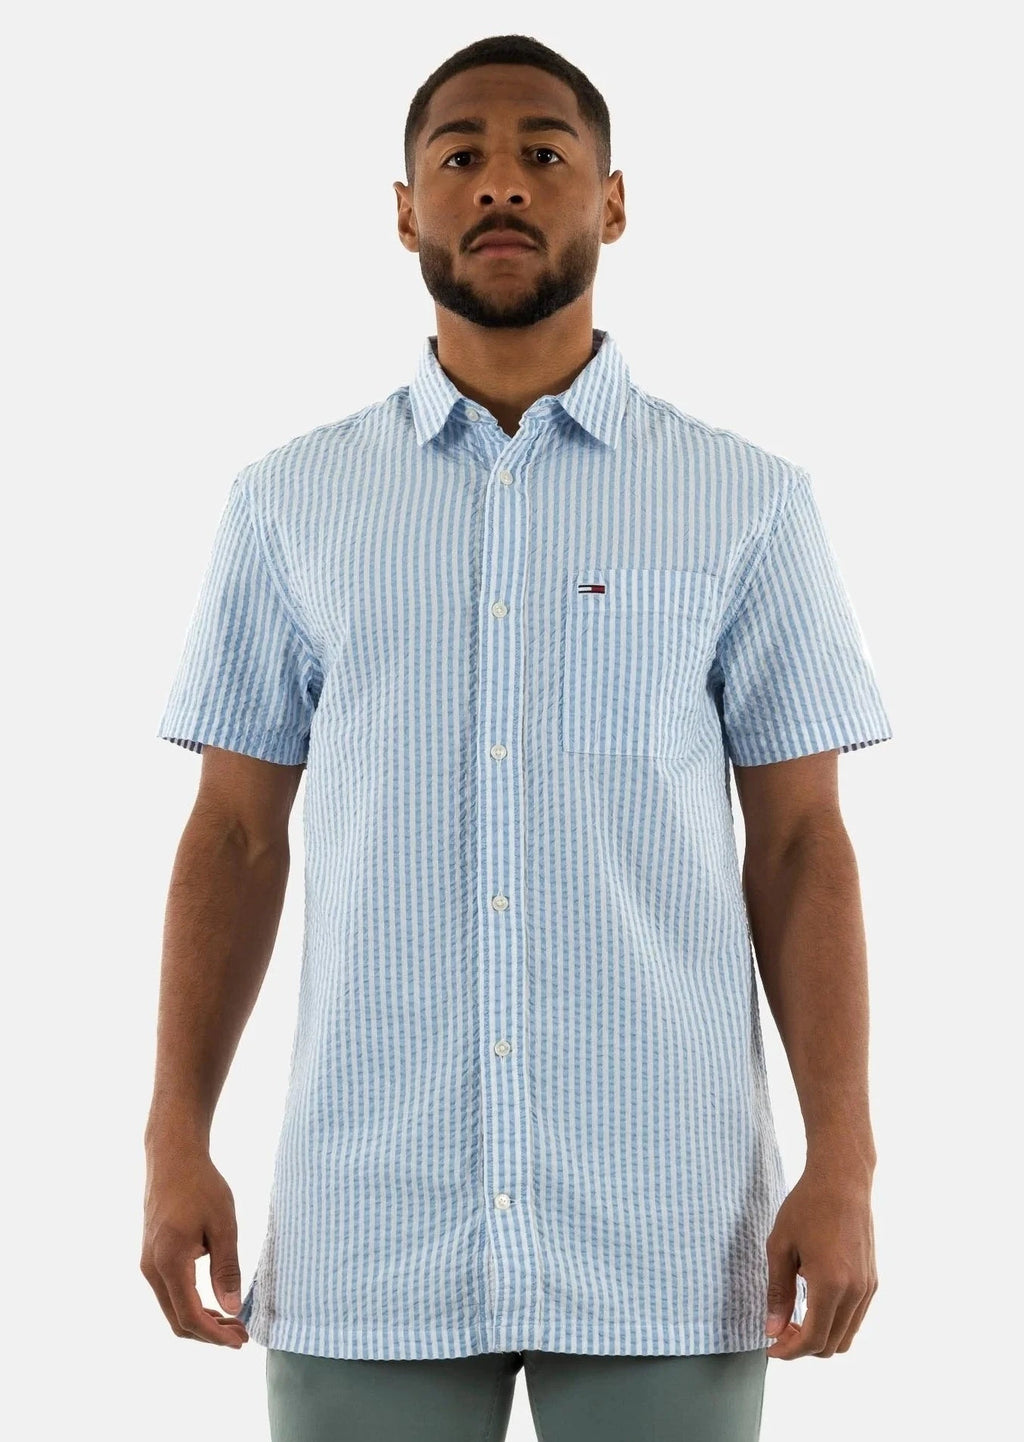 Chemise rayée manches courtes homme Tommy Jeans bleue | Georgespaul